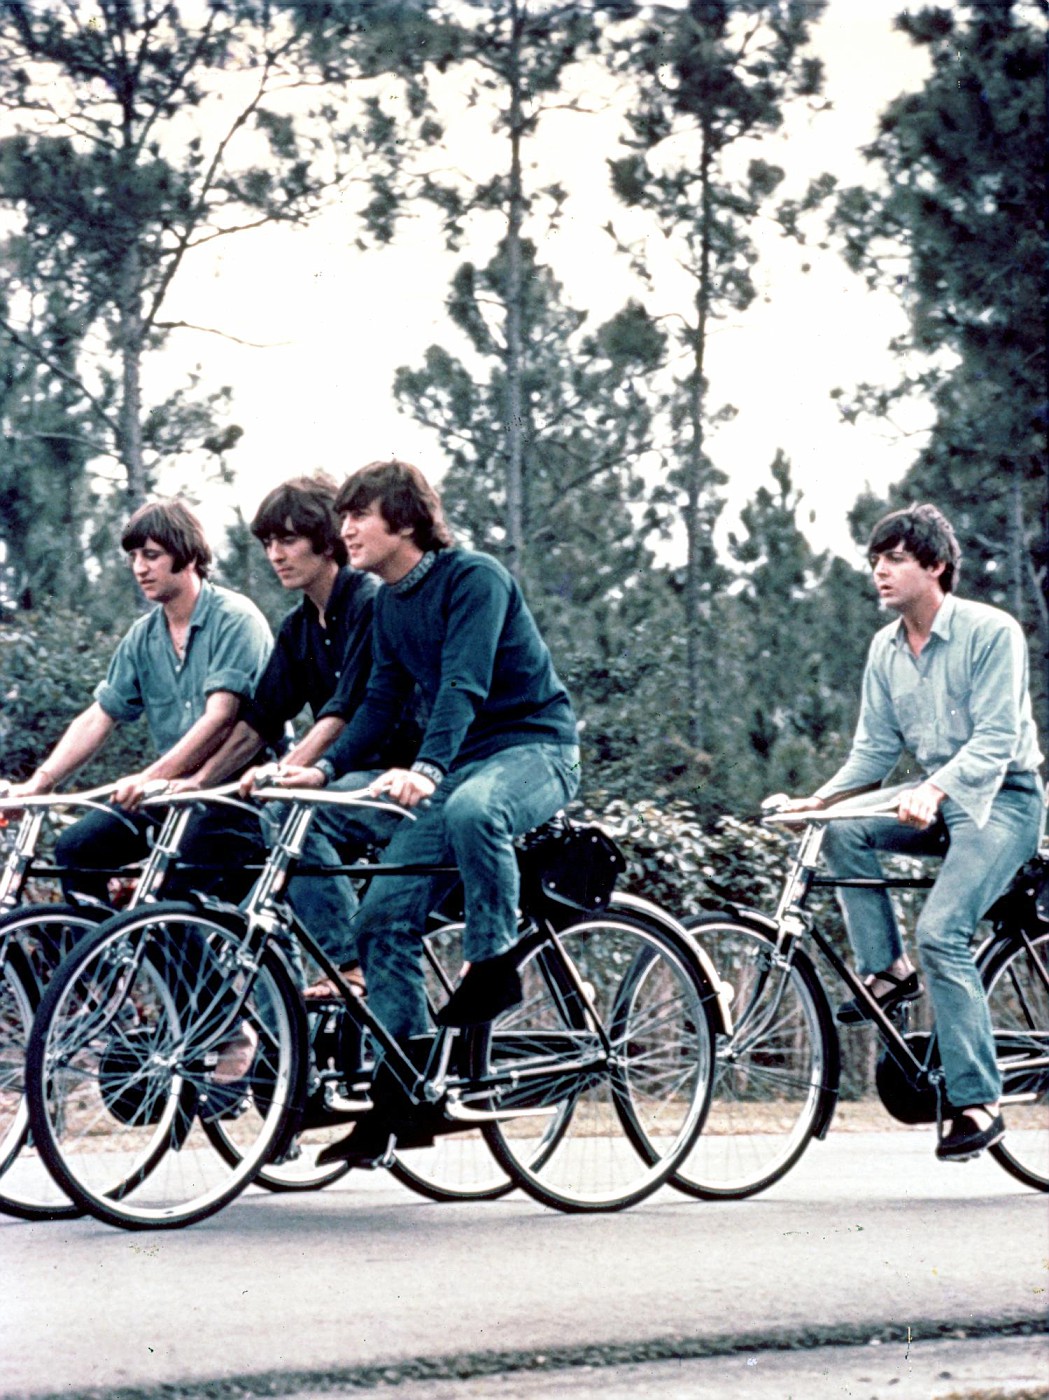 Who knows this cycling gang?